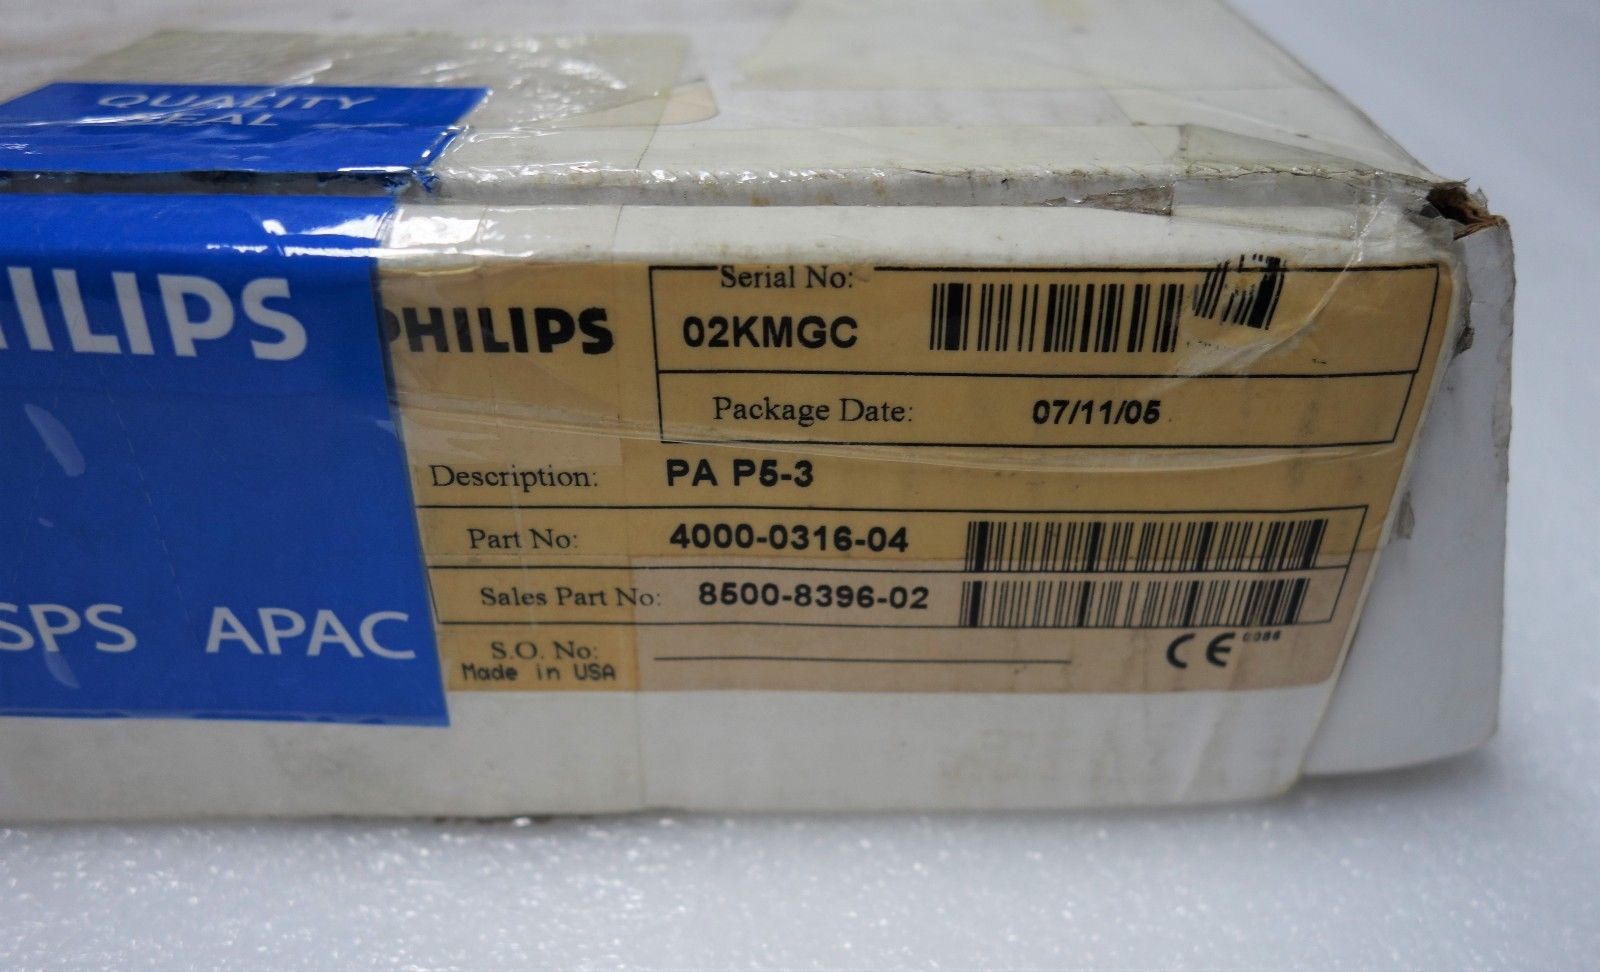 PHILIPS PA P5-3 CARDIAC ULTRASOUND TRANSDUCER PROBE PHASED ARRAY 4000-0316-04 DIAGNOSTIC ULTRASOUND MACHINES FOR SALE